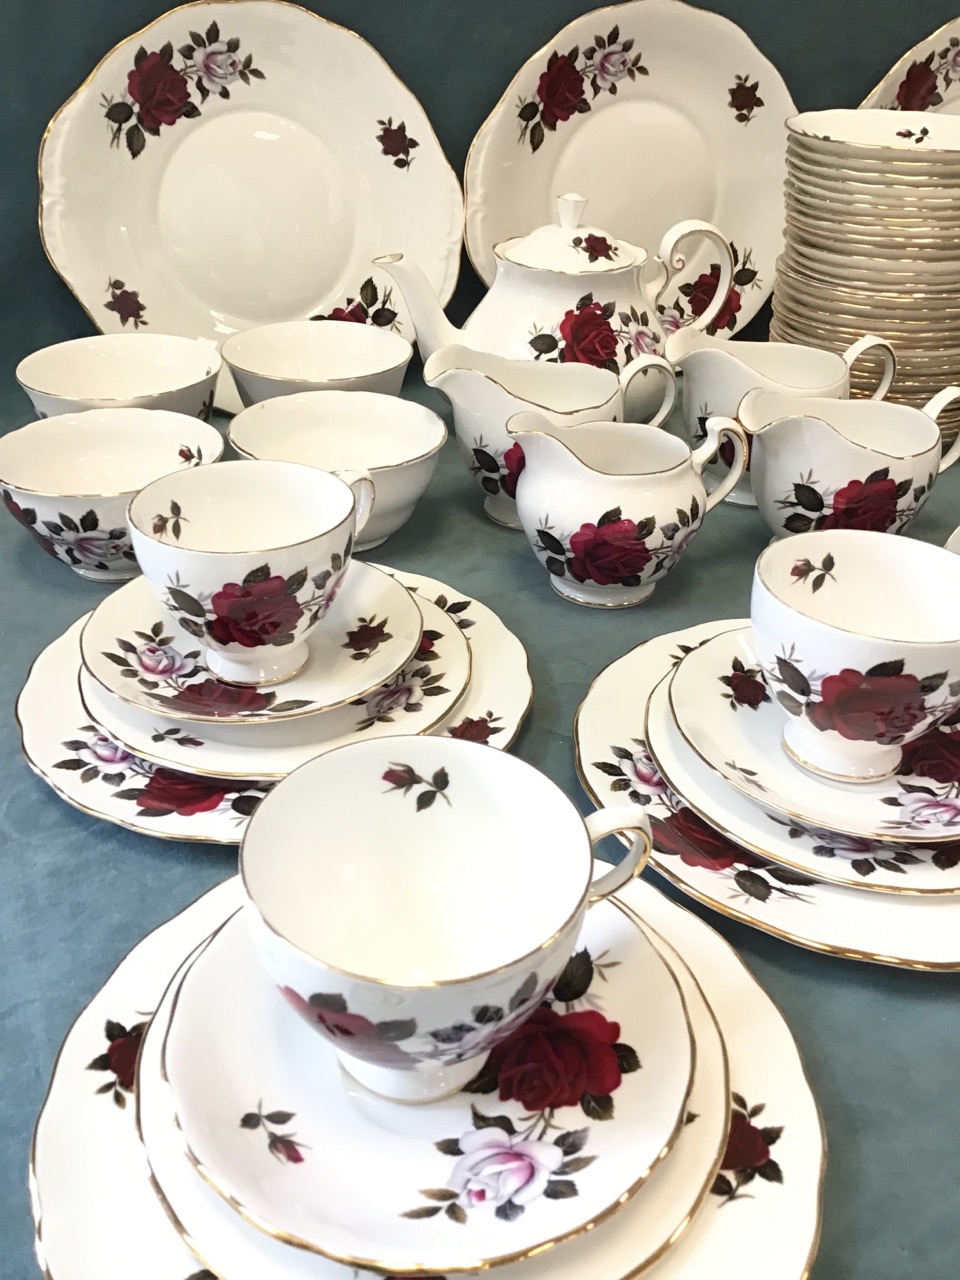 An extensive Colclough porcelain dinner & tea service decorated with roses - plates, cups & saucers, - Image 2 of 3